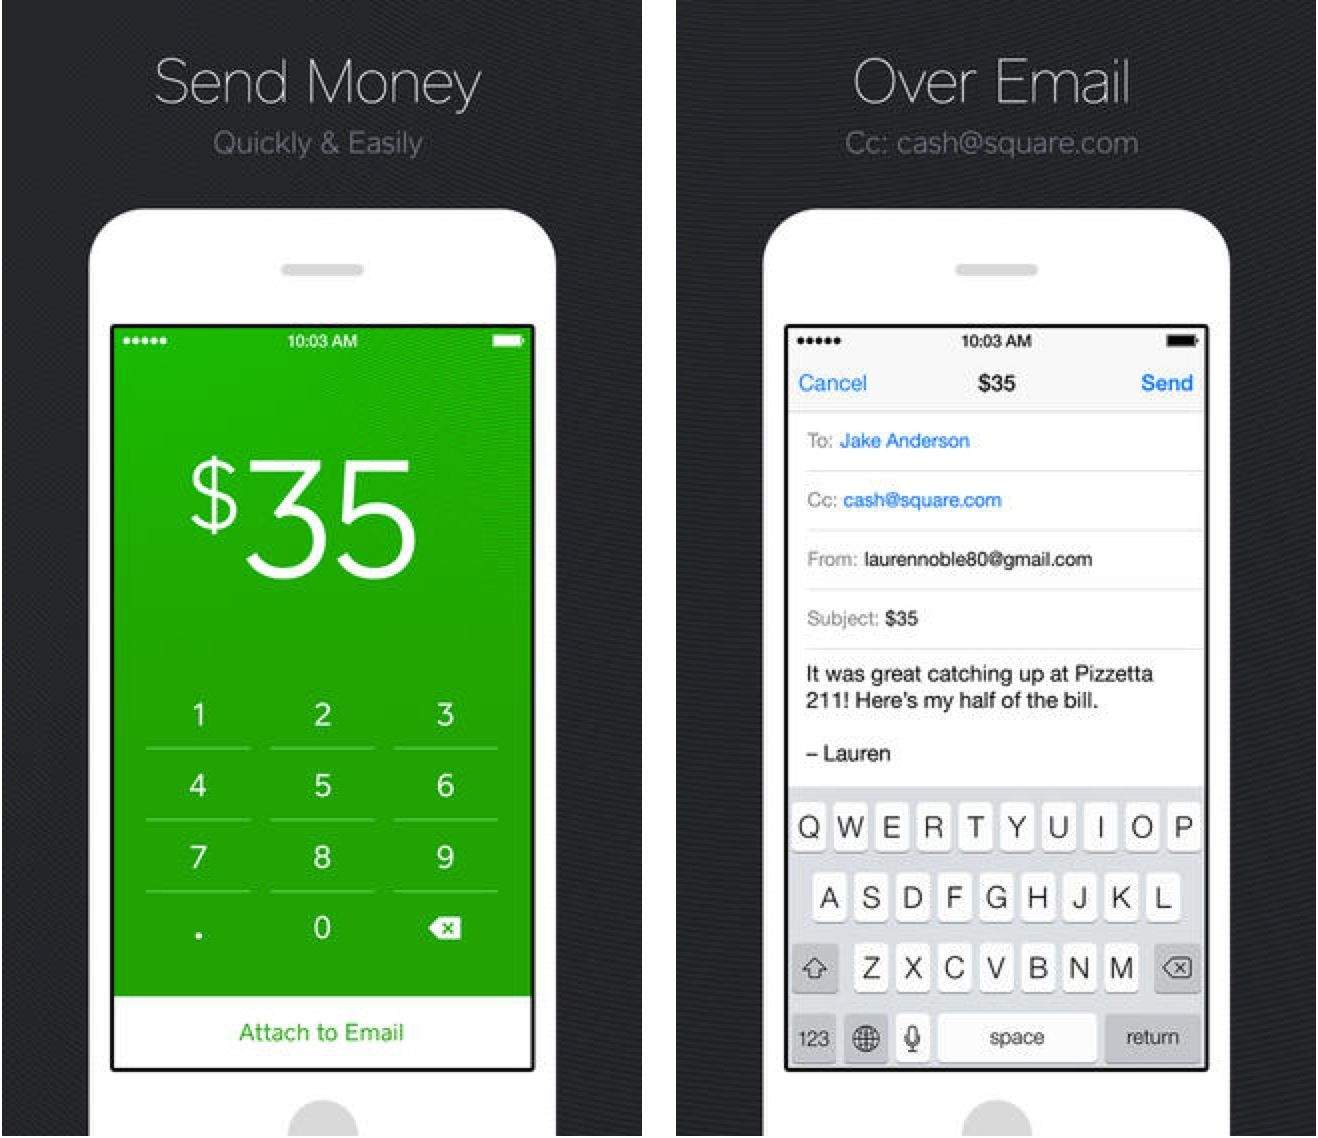 Square Cash Lets You Send Real Money To Anyone Over Email